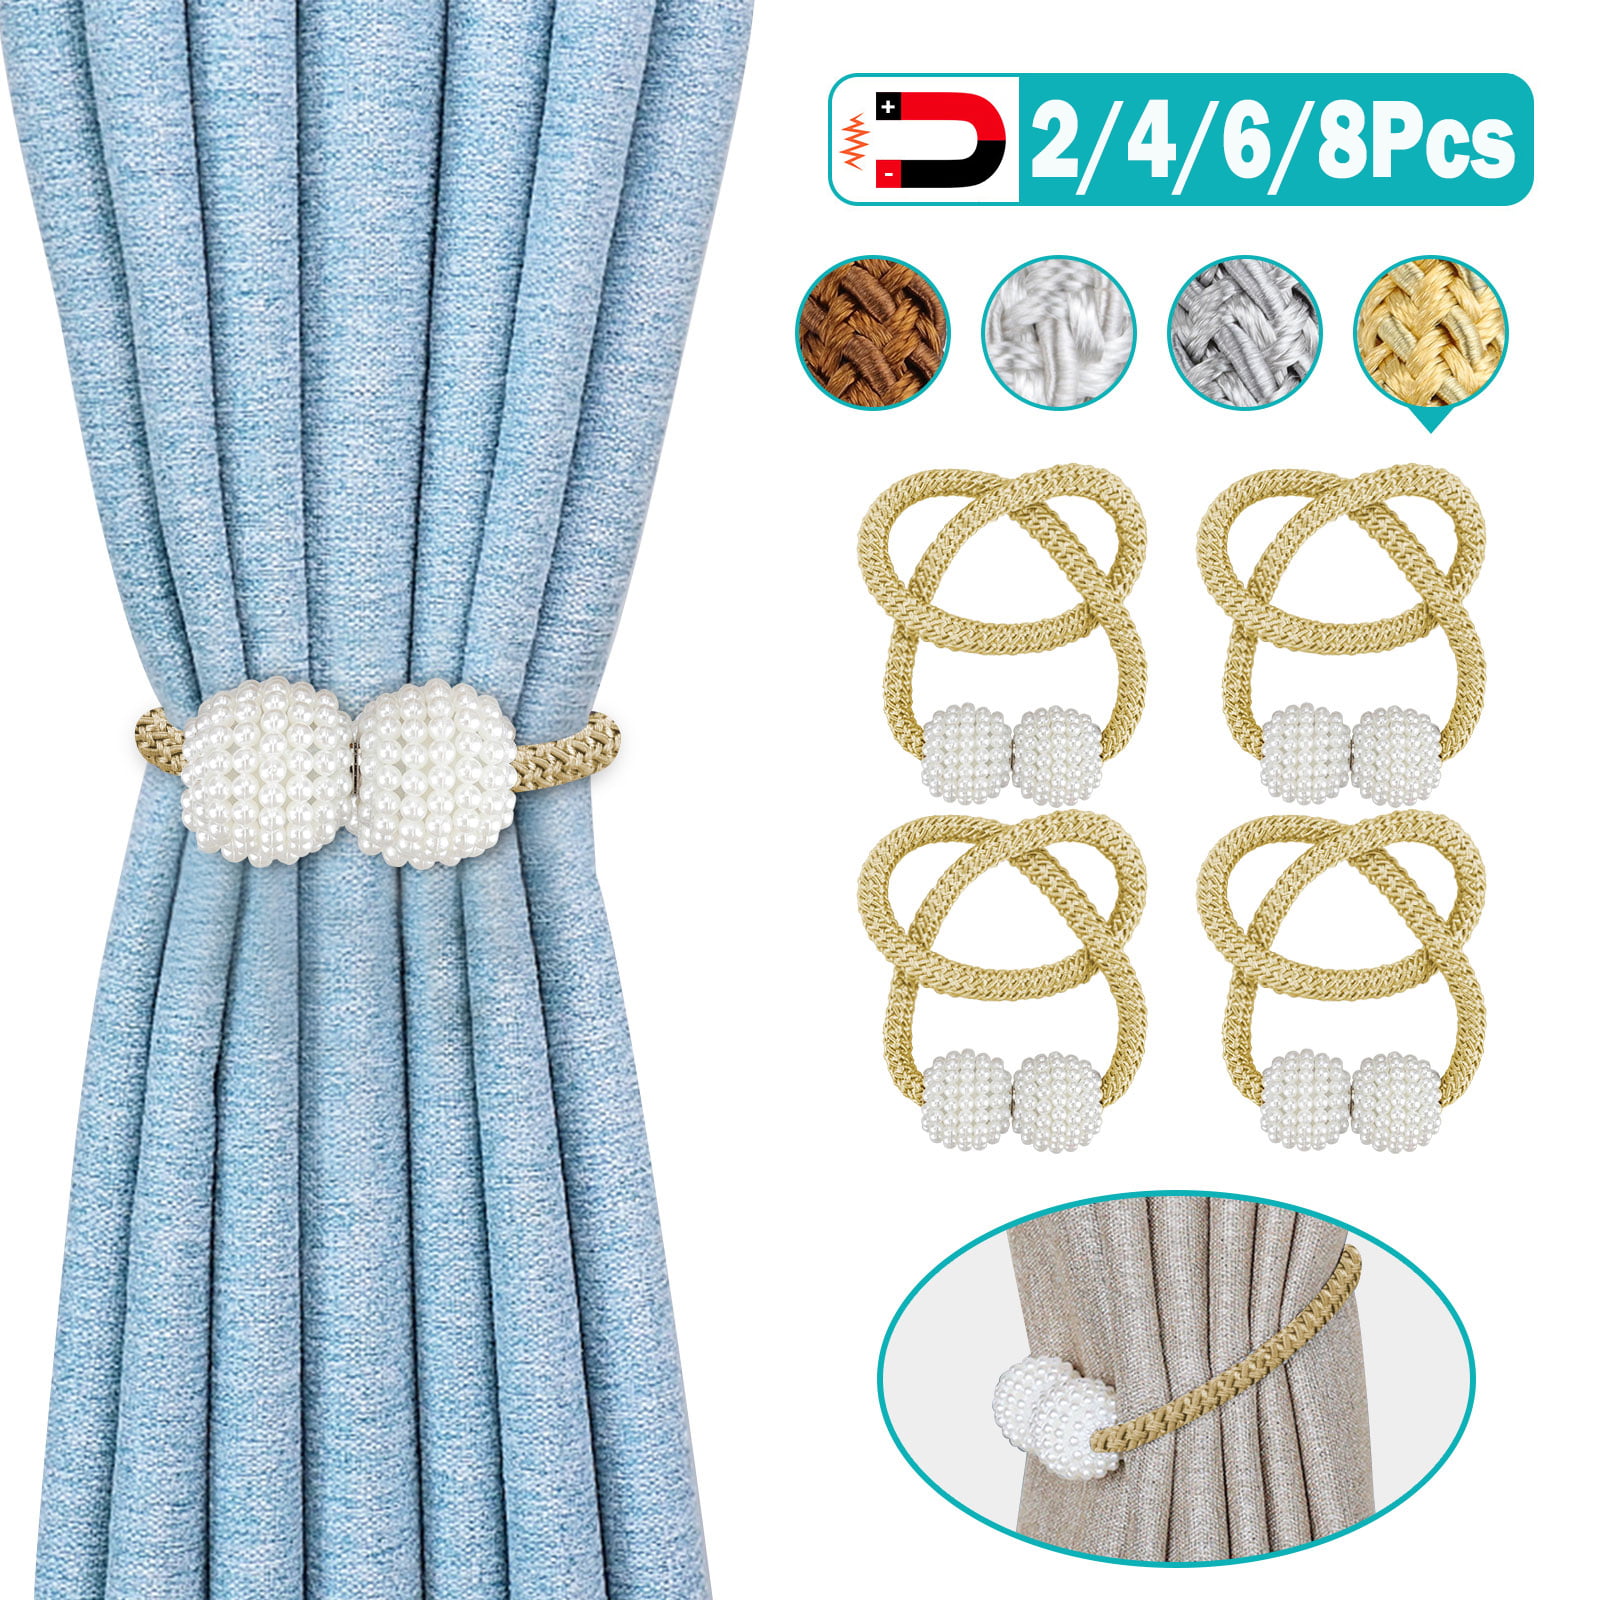 2pcs Simple Magnet Curtain Buckles Magnetic Window Curtains Accessories Free-ins 